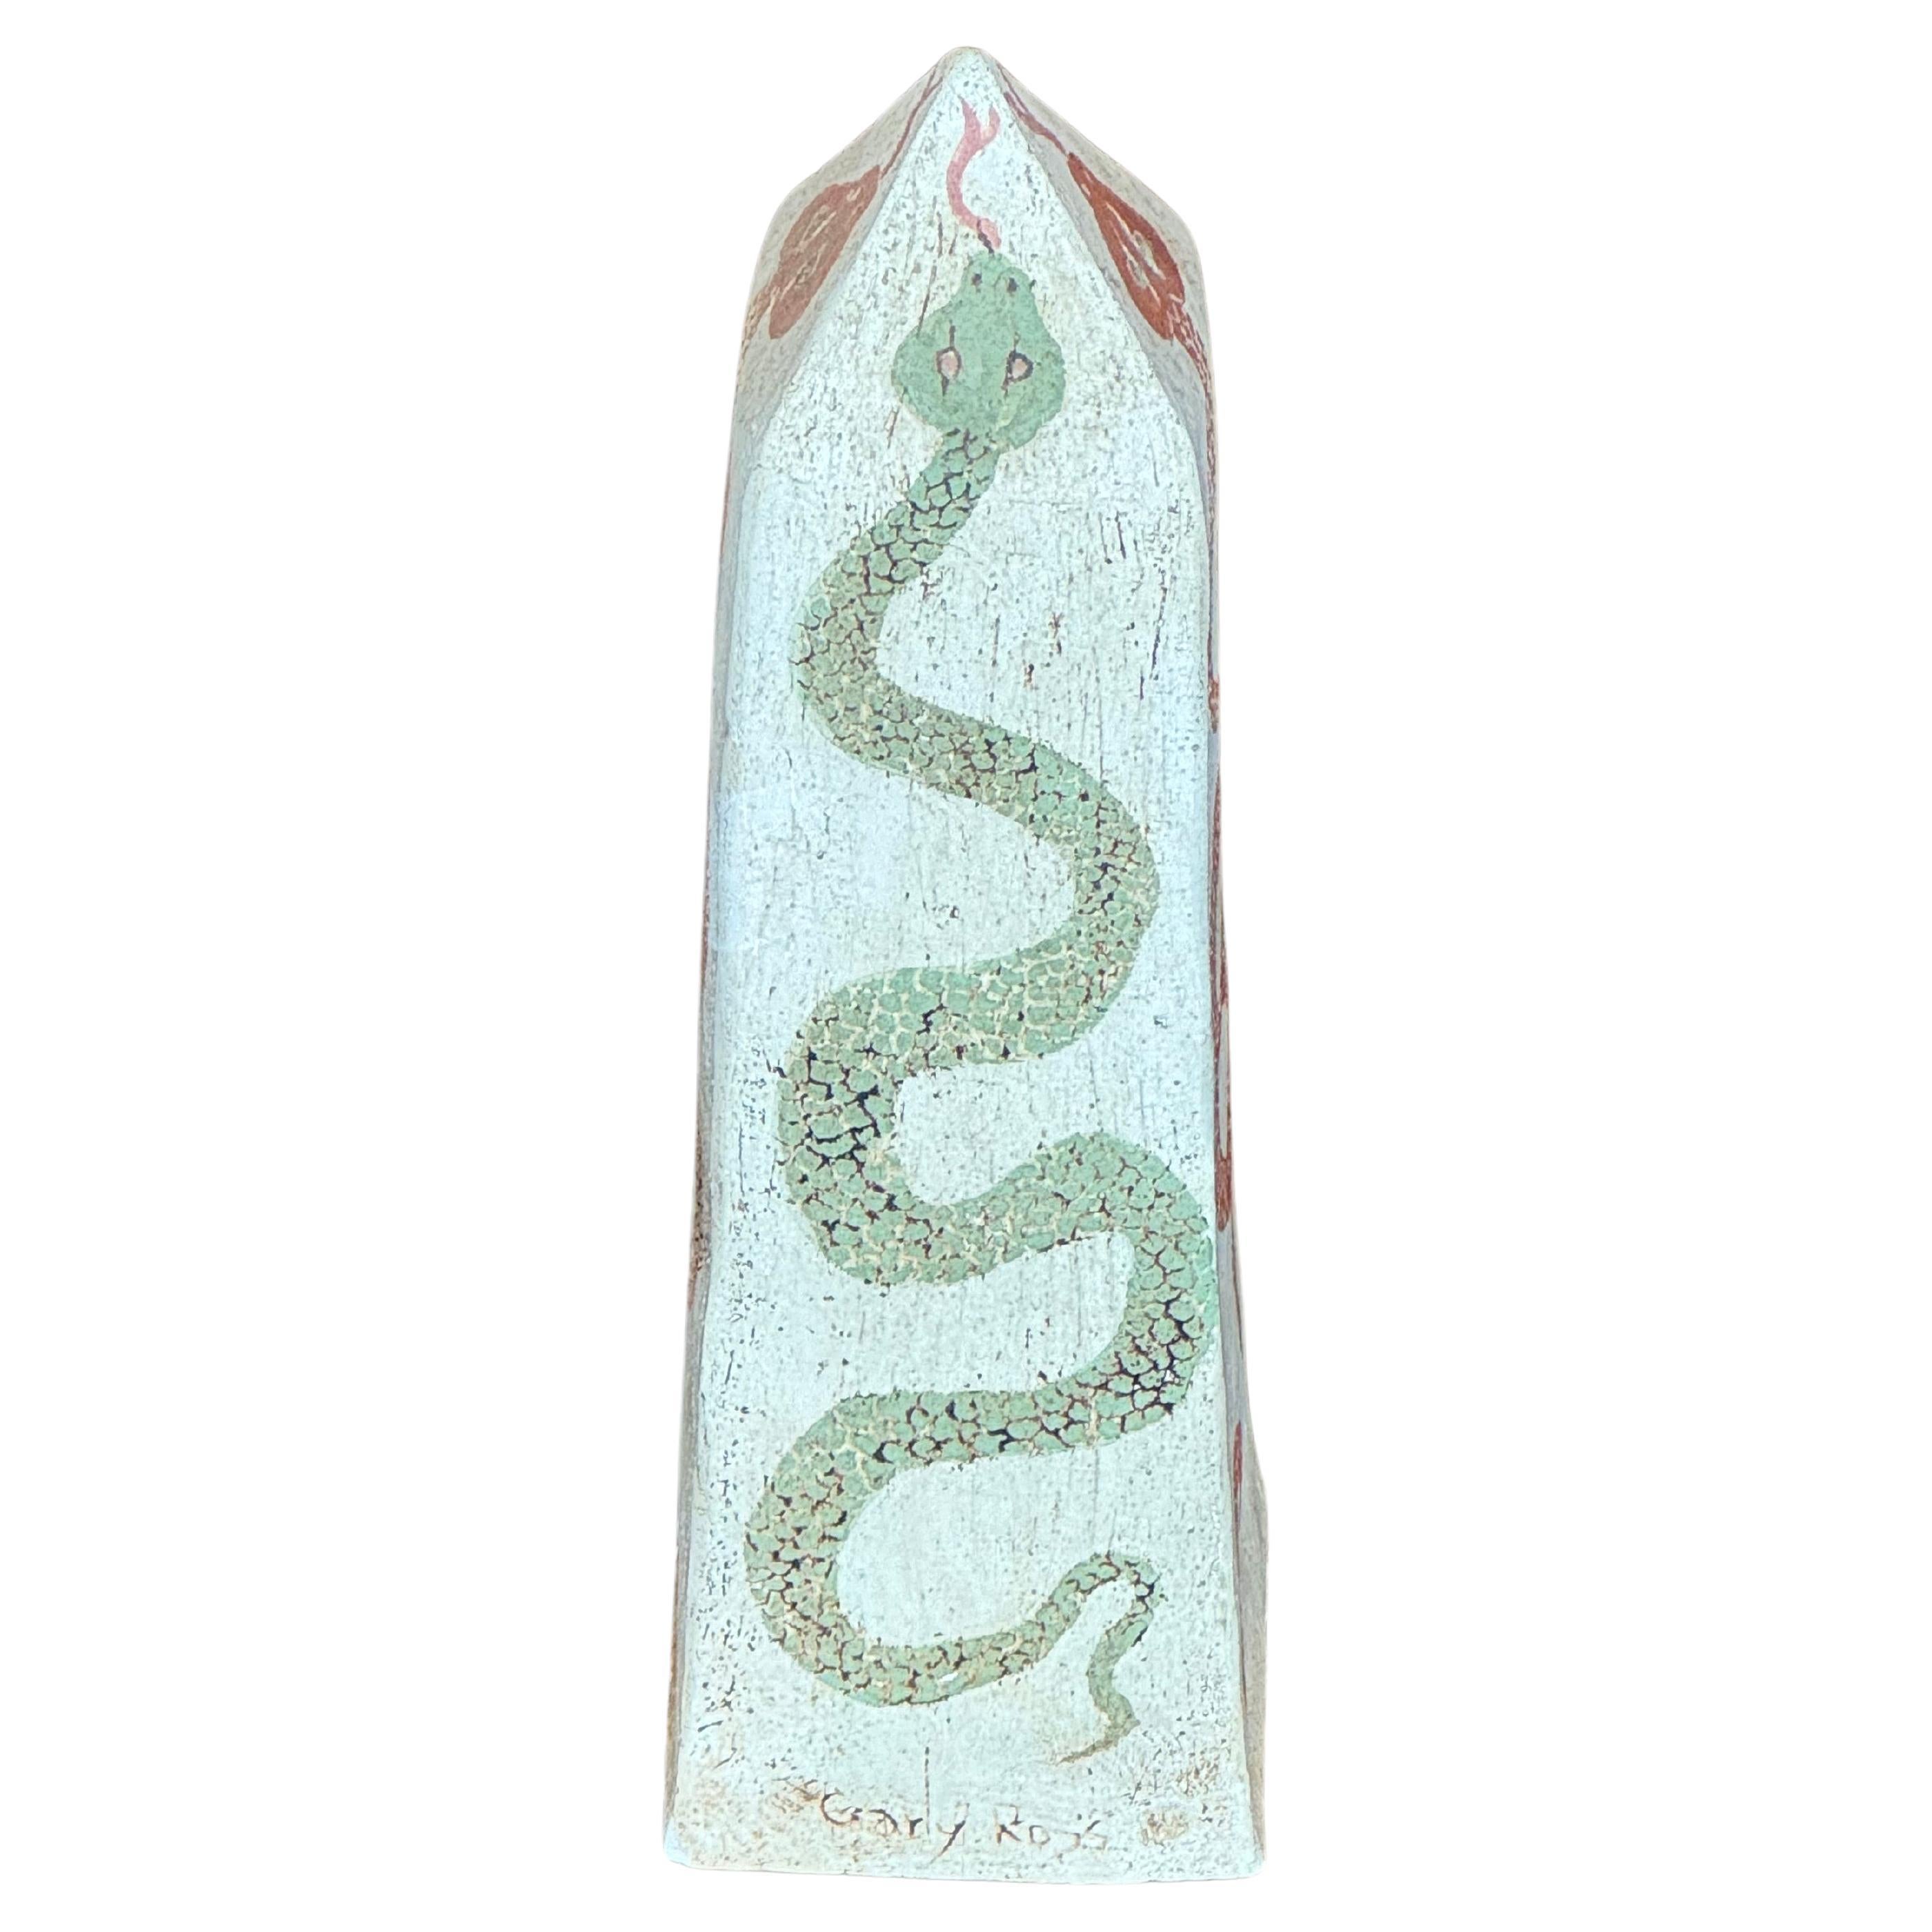 This solid ceramic midcentury tricolor serpent obelisk features captivating hand-painted snake embellishments, symbolizing themes of life, death, and rebirth. Serpents hold a prevalent cultural significance in fine antiquities across various